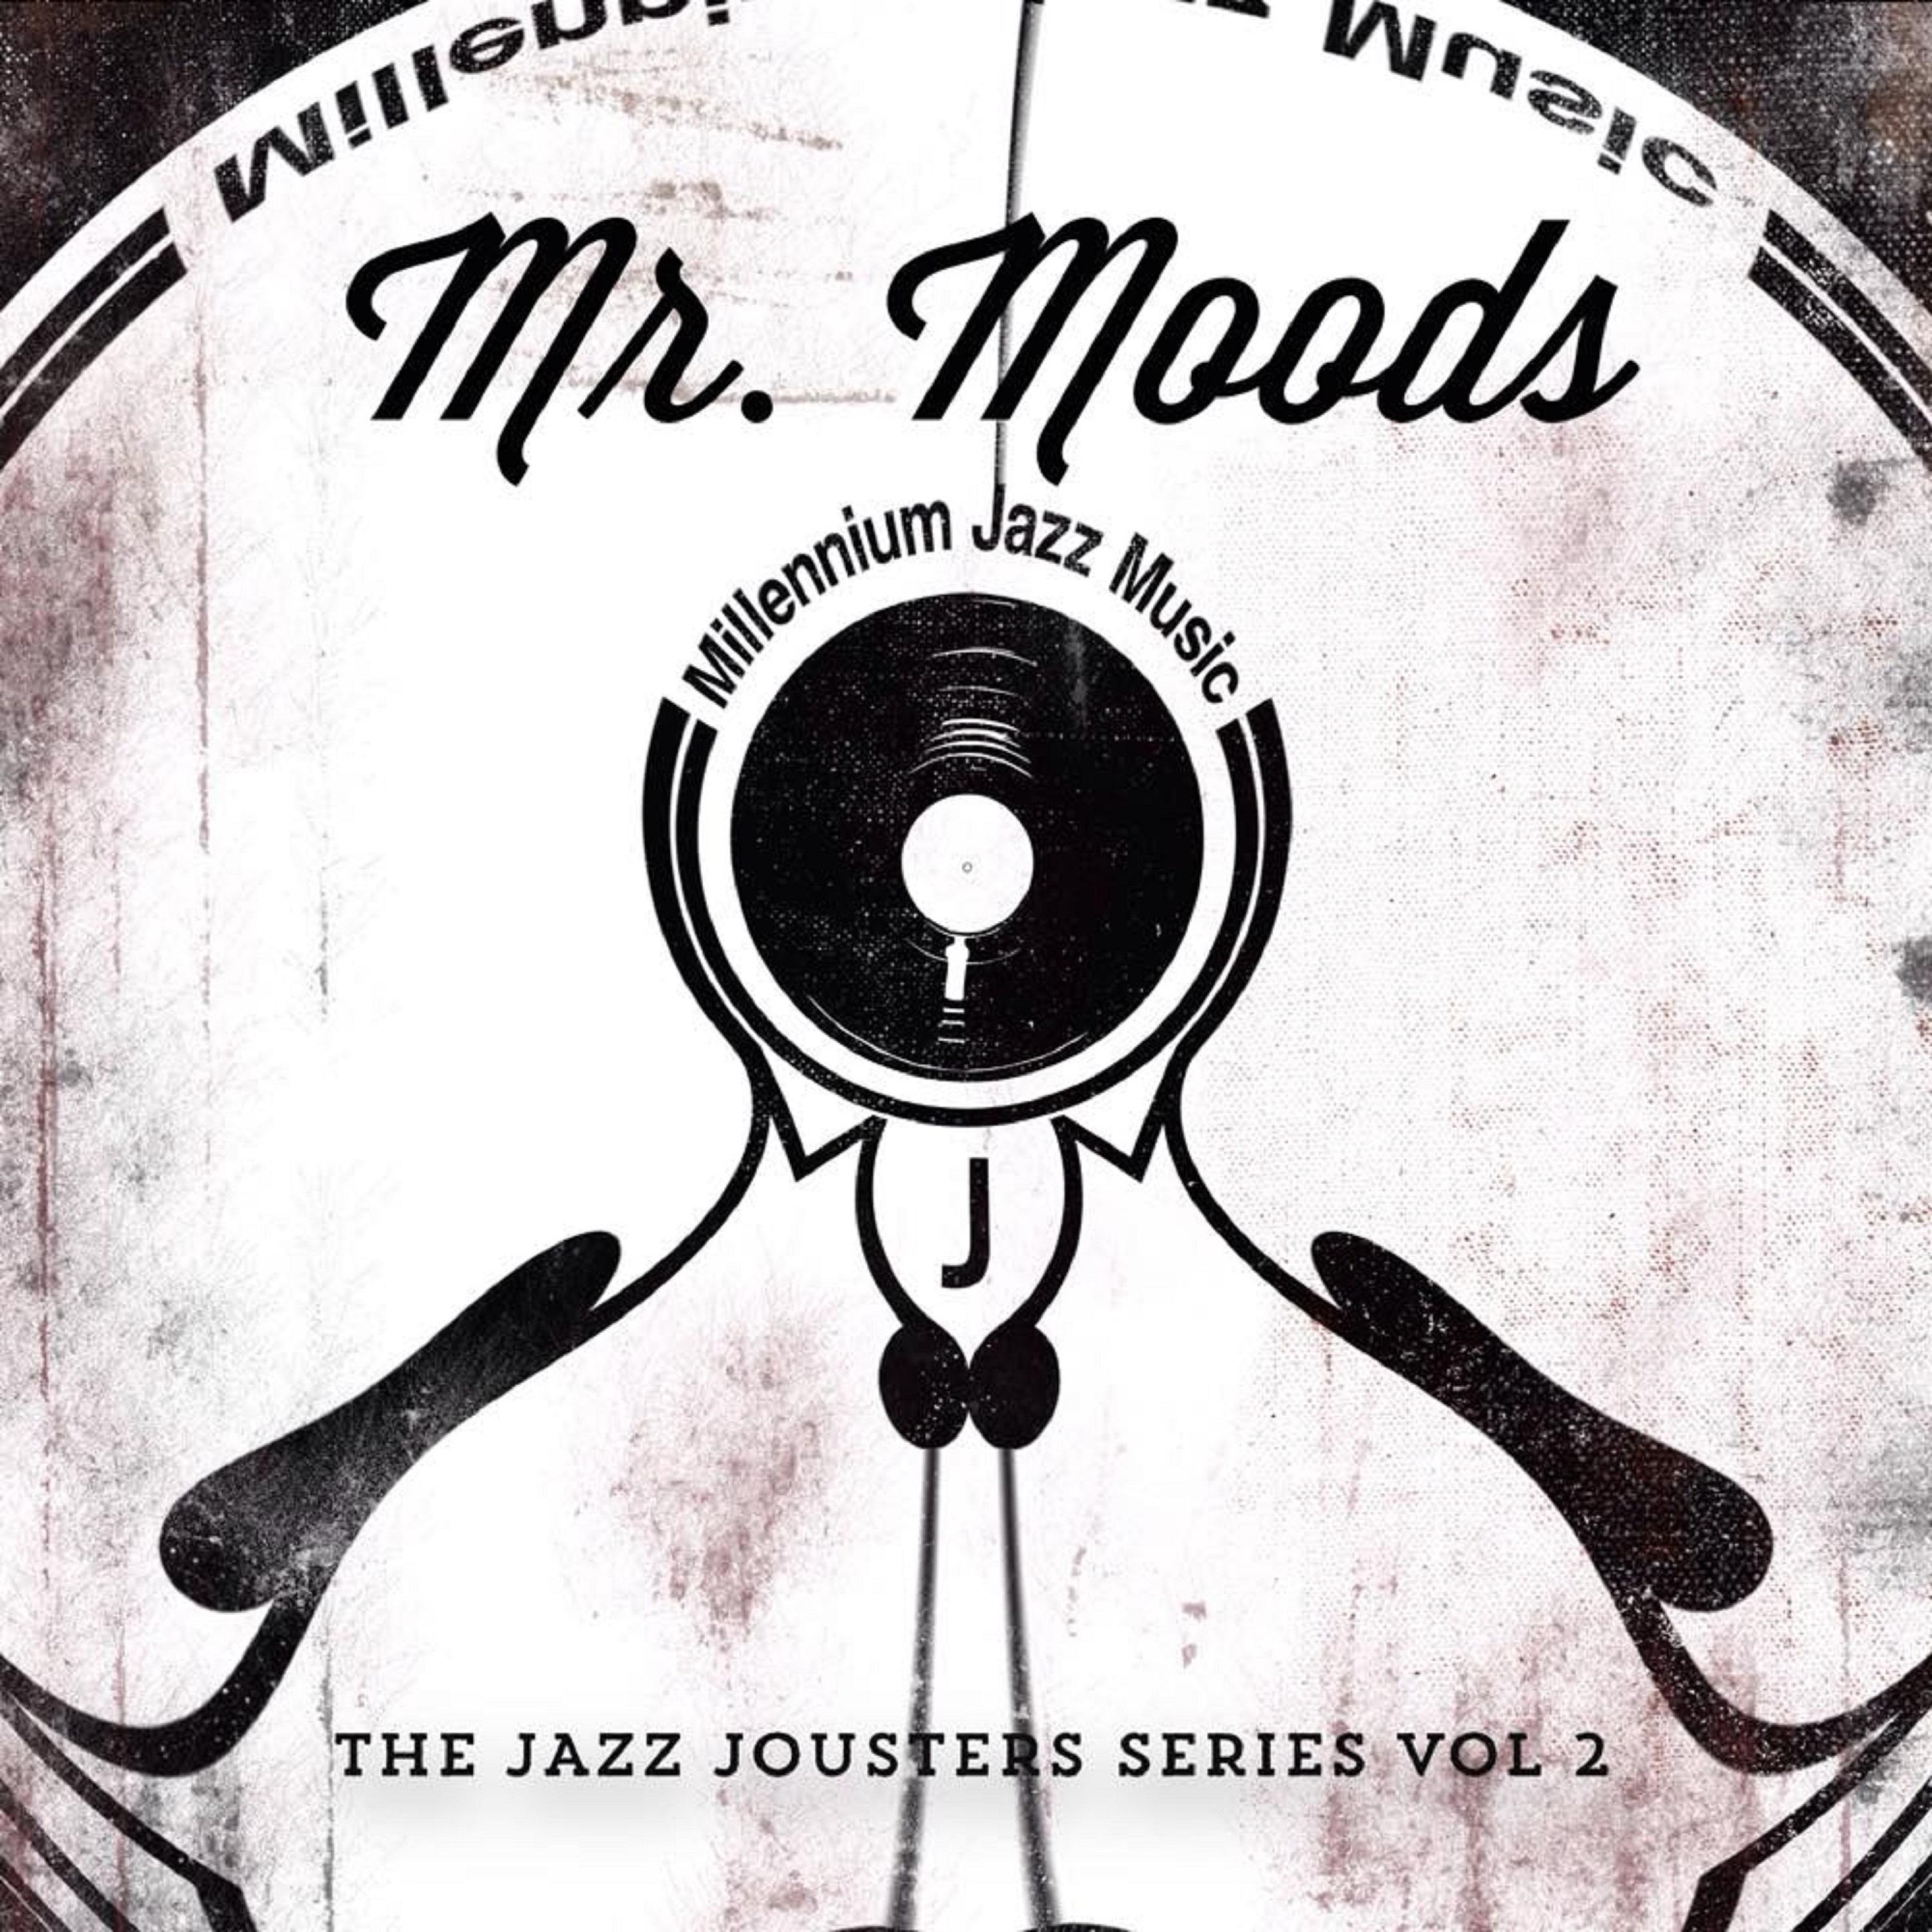 The Jazz Jousters Series, Vol. 2